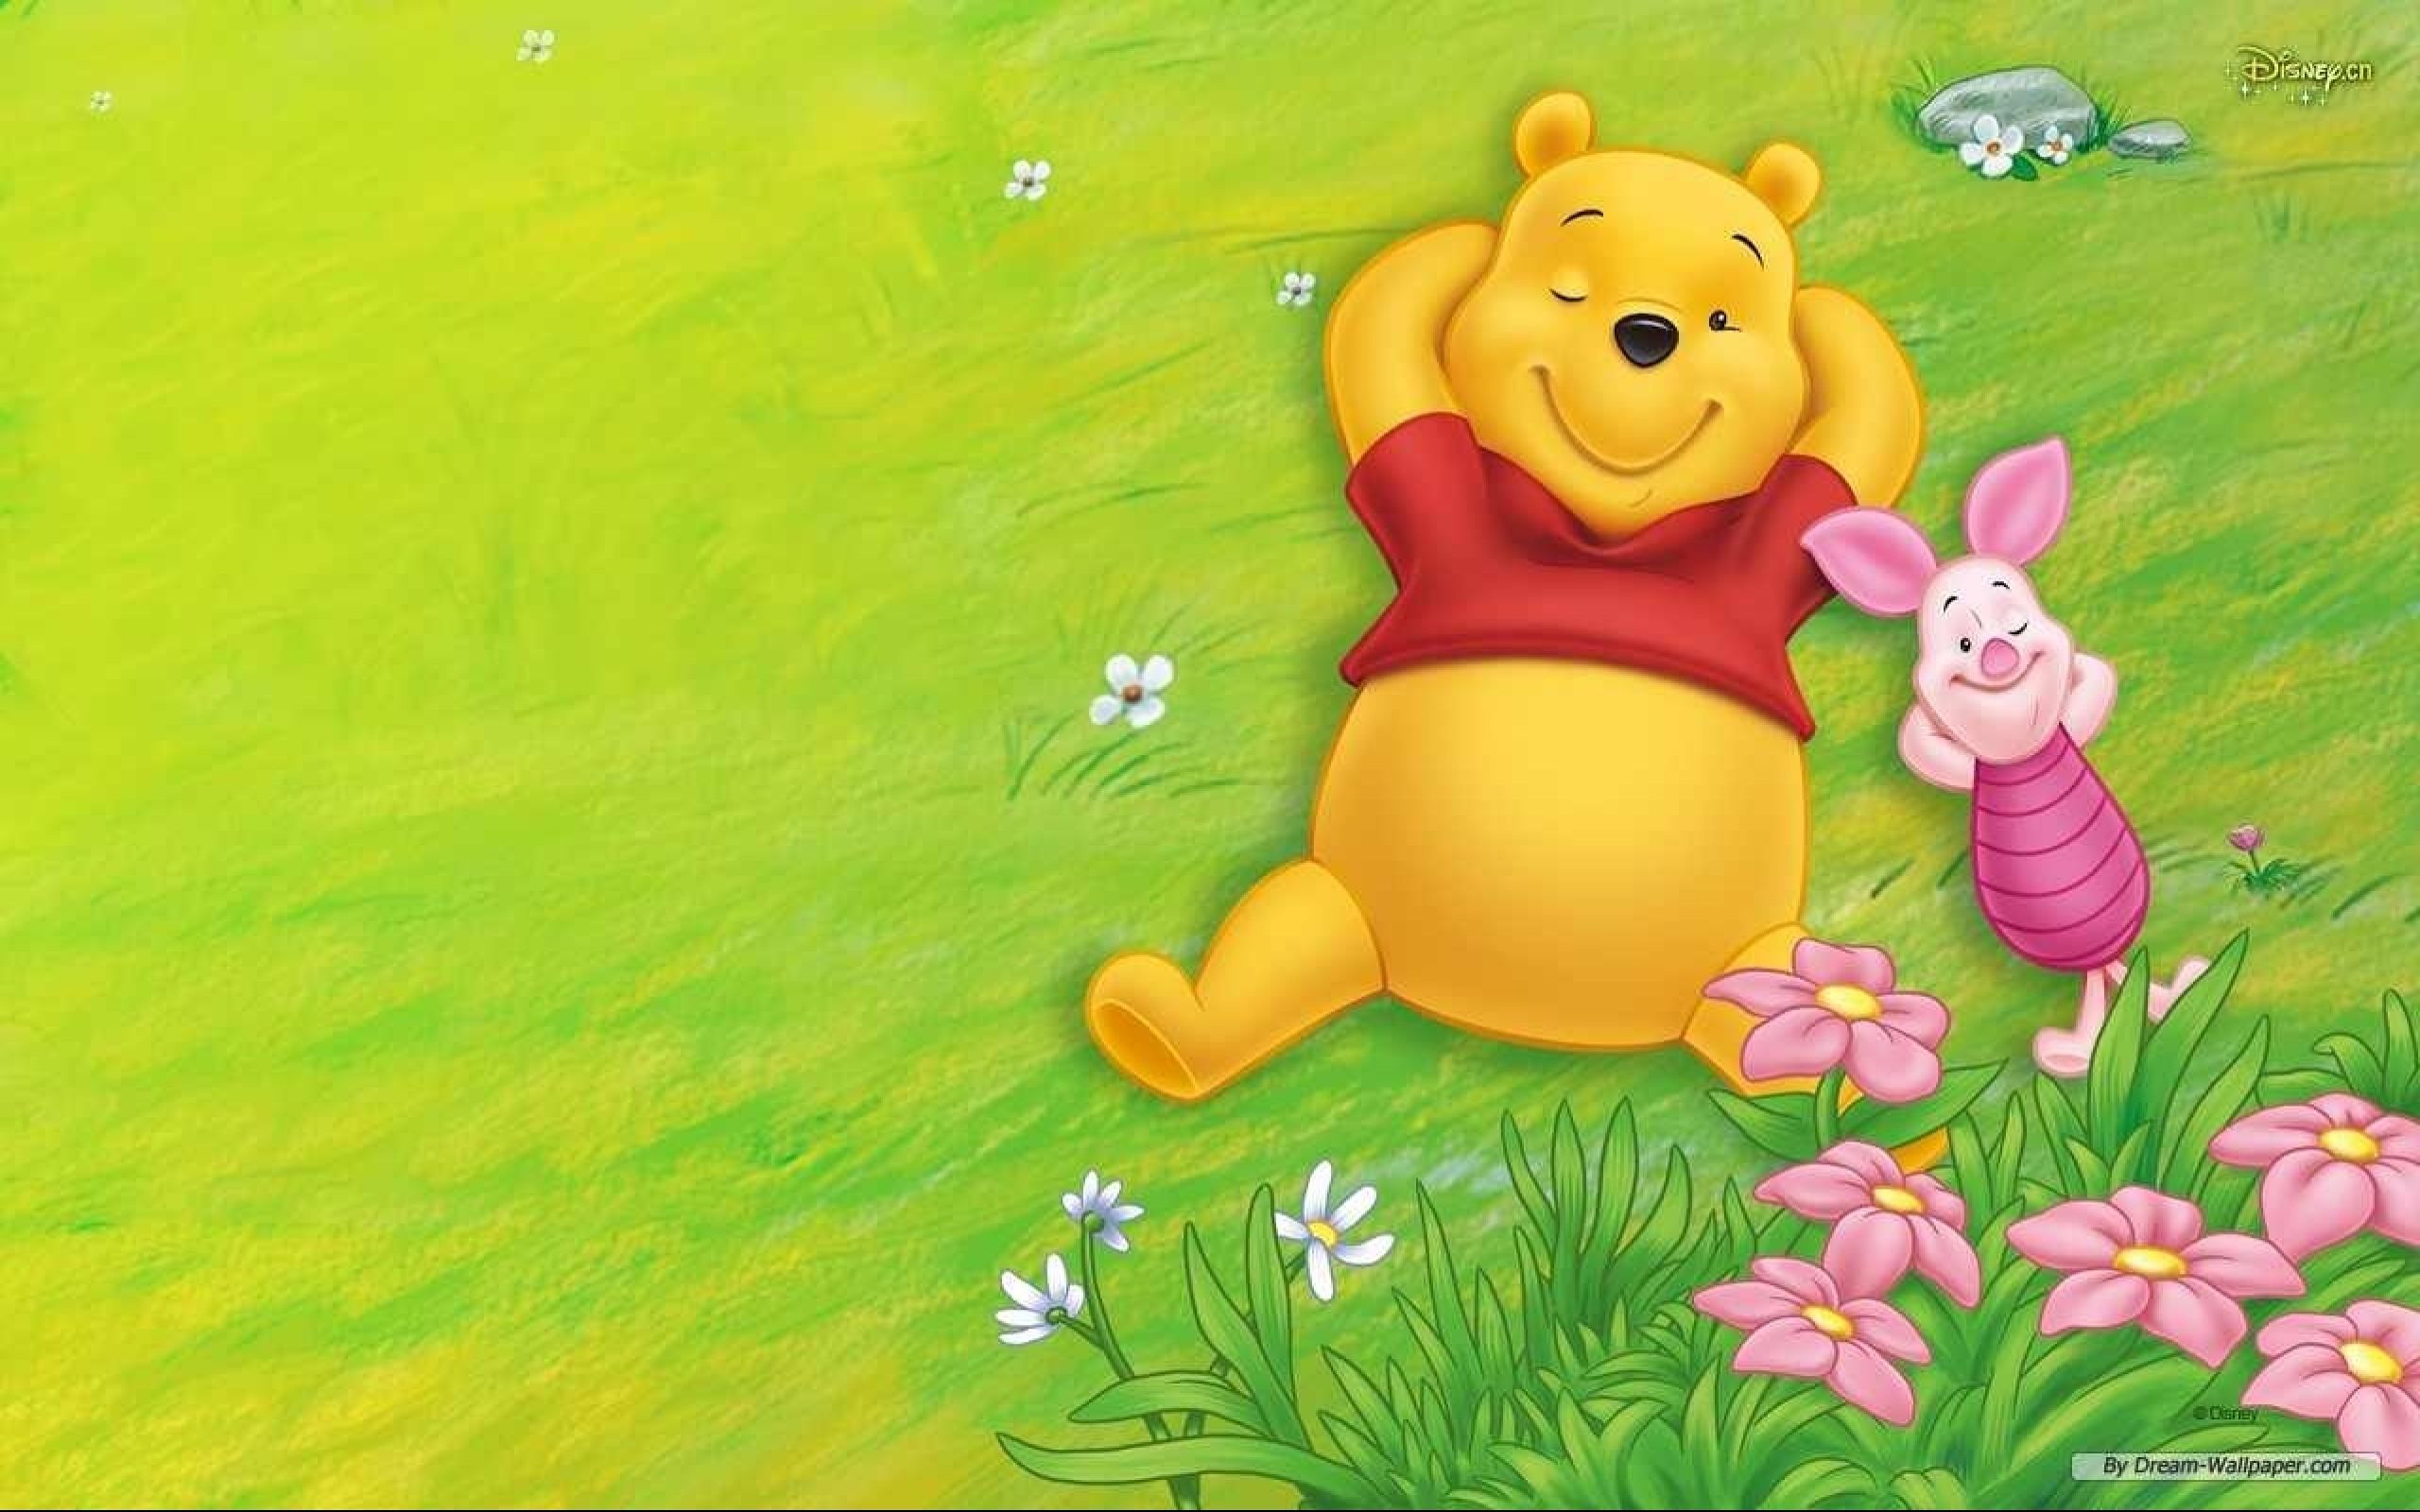 10 Things Winnie-The-Pooh Can Teach You About Life